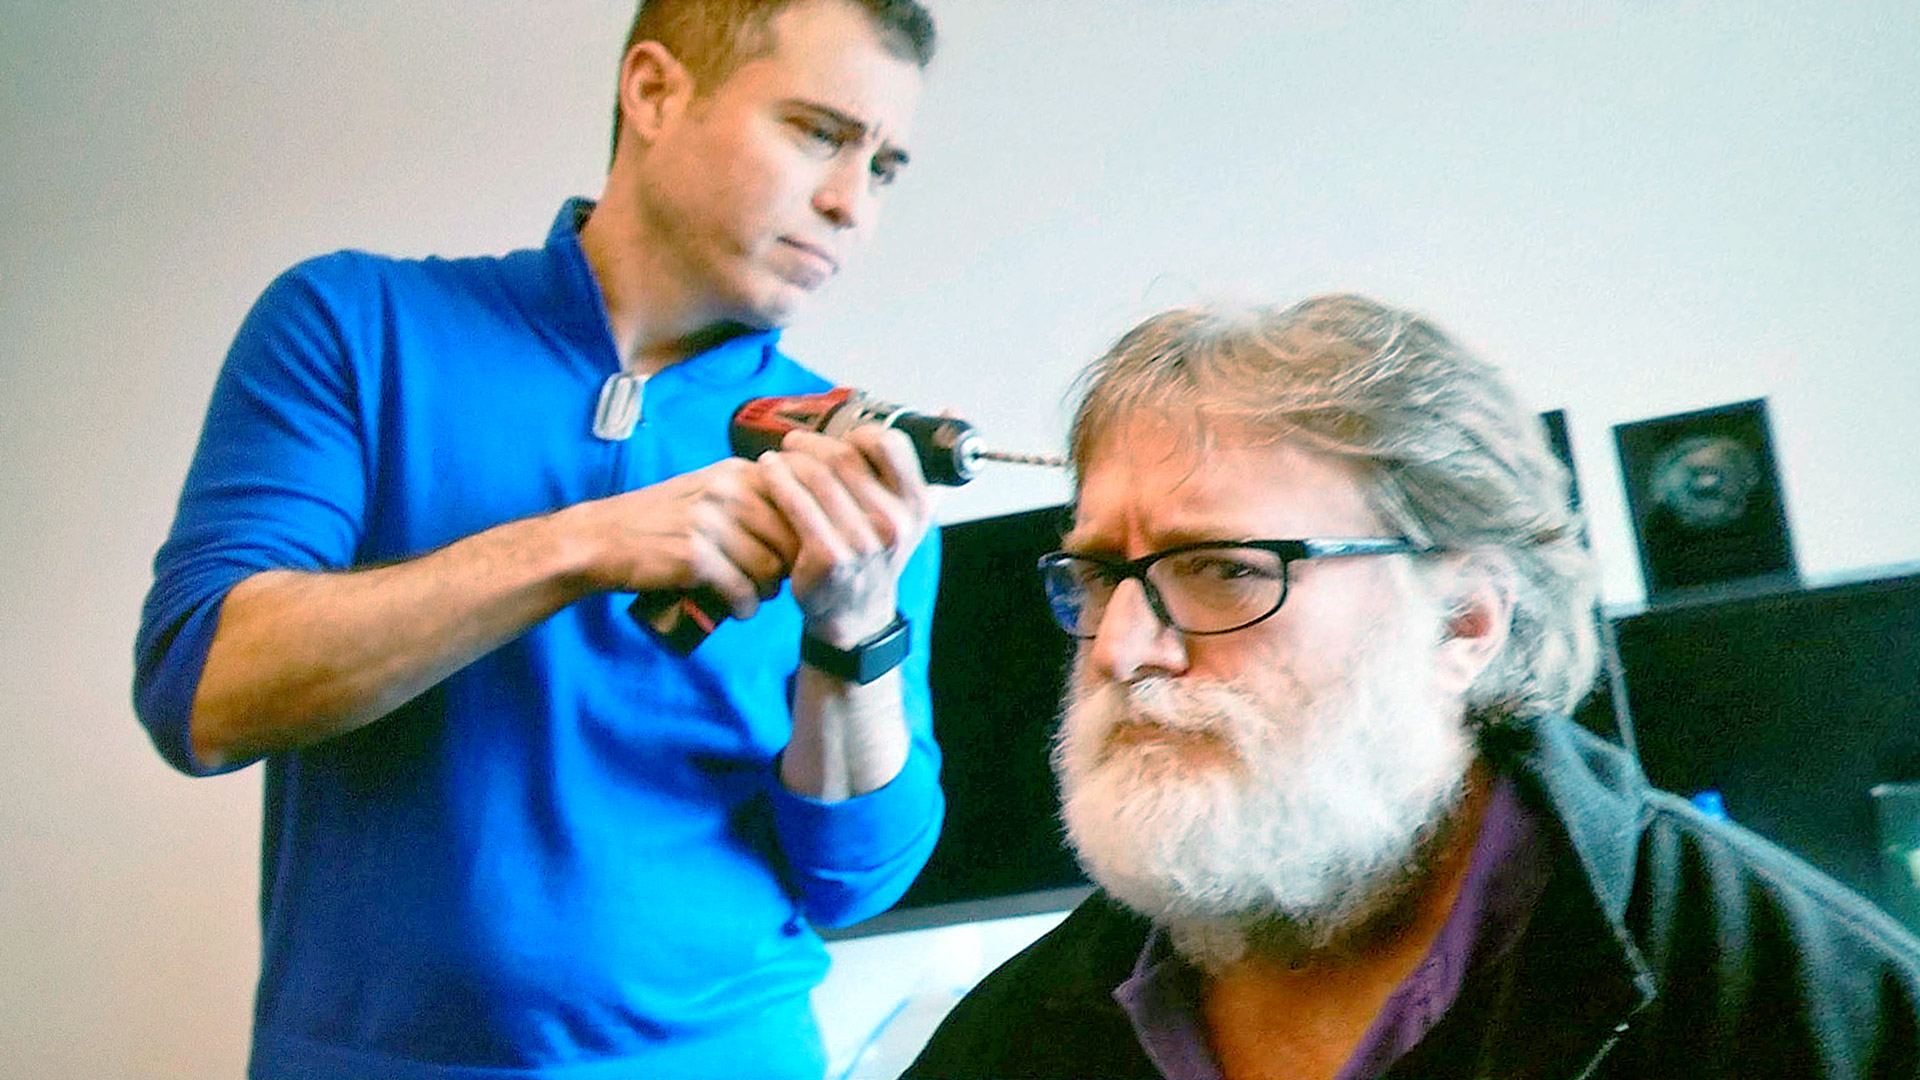 Gabe Newell prefers Xbox over PlayStation, talks about brain computing  again